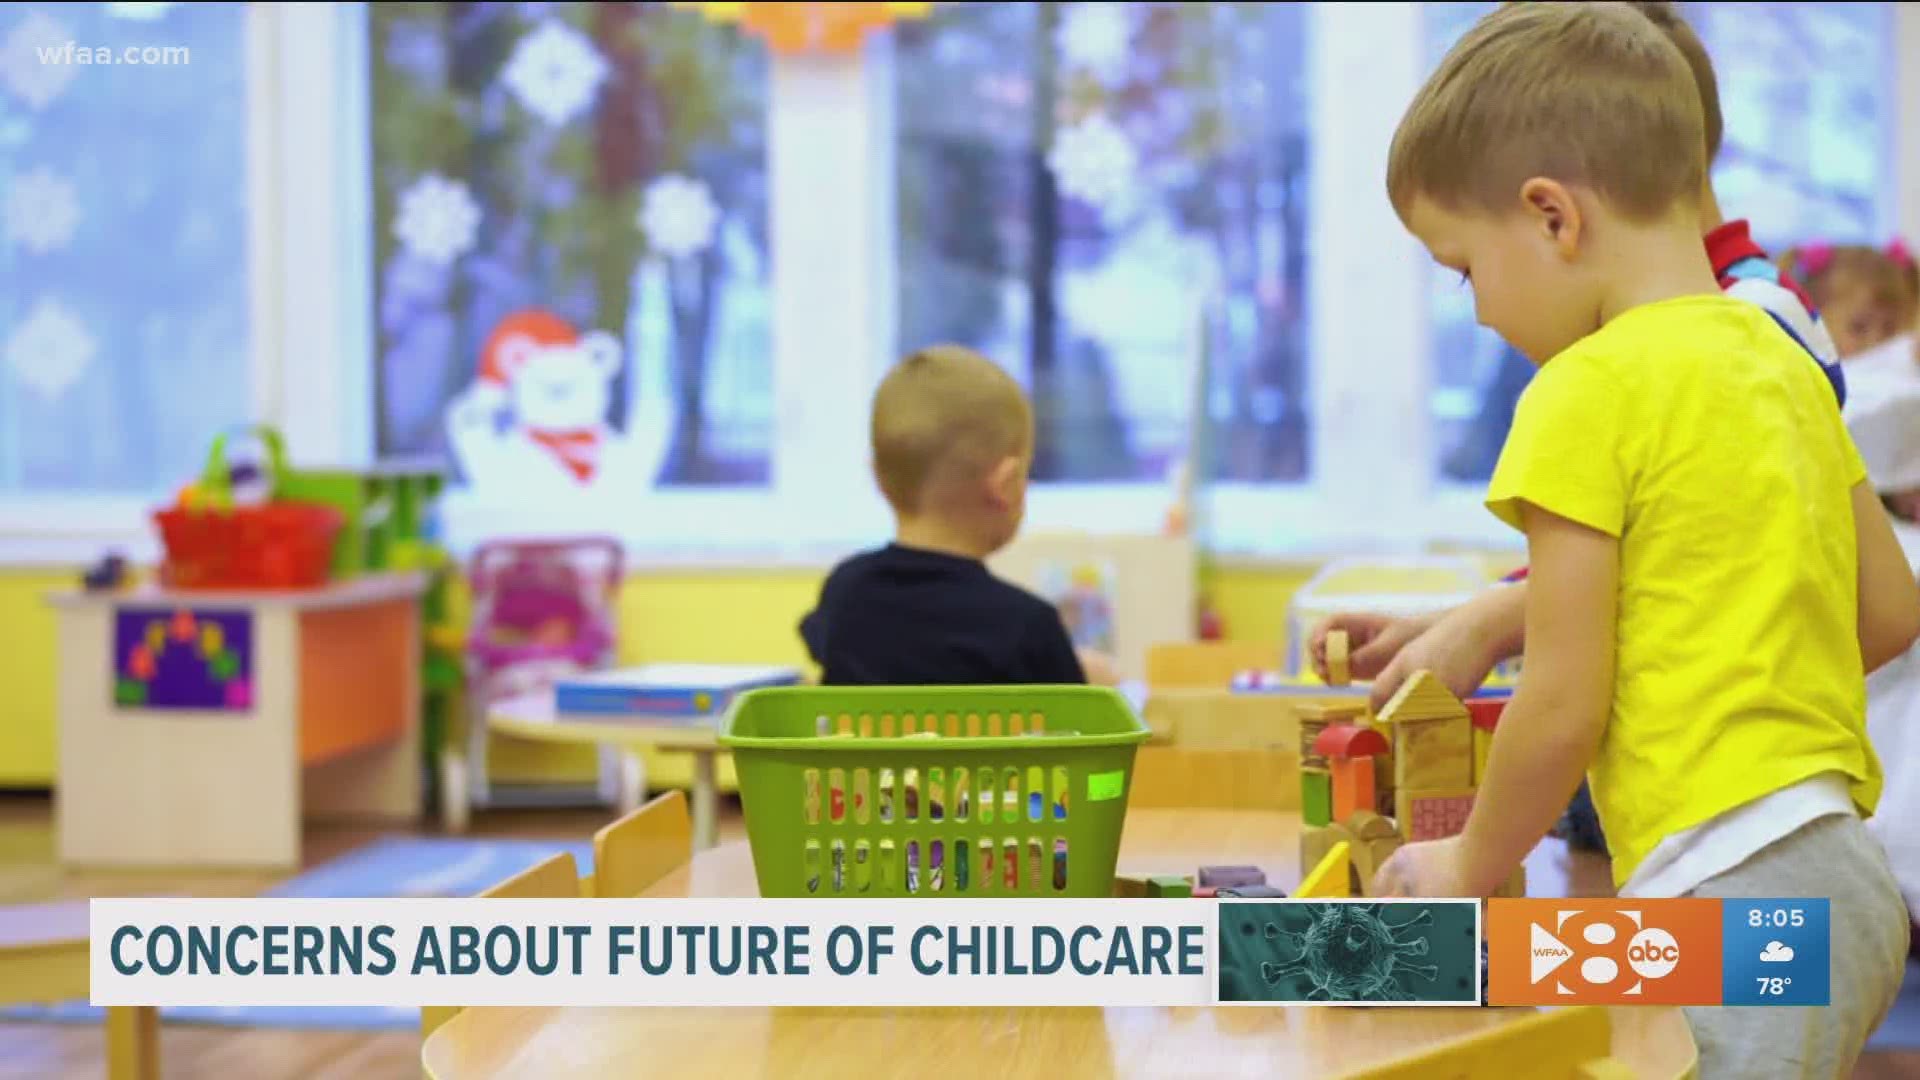 The country is at risk of losing half its childcare capacity, & if that happens, what are parents to do? It's a question troubling for the reopening of the economy.